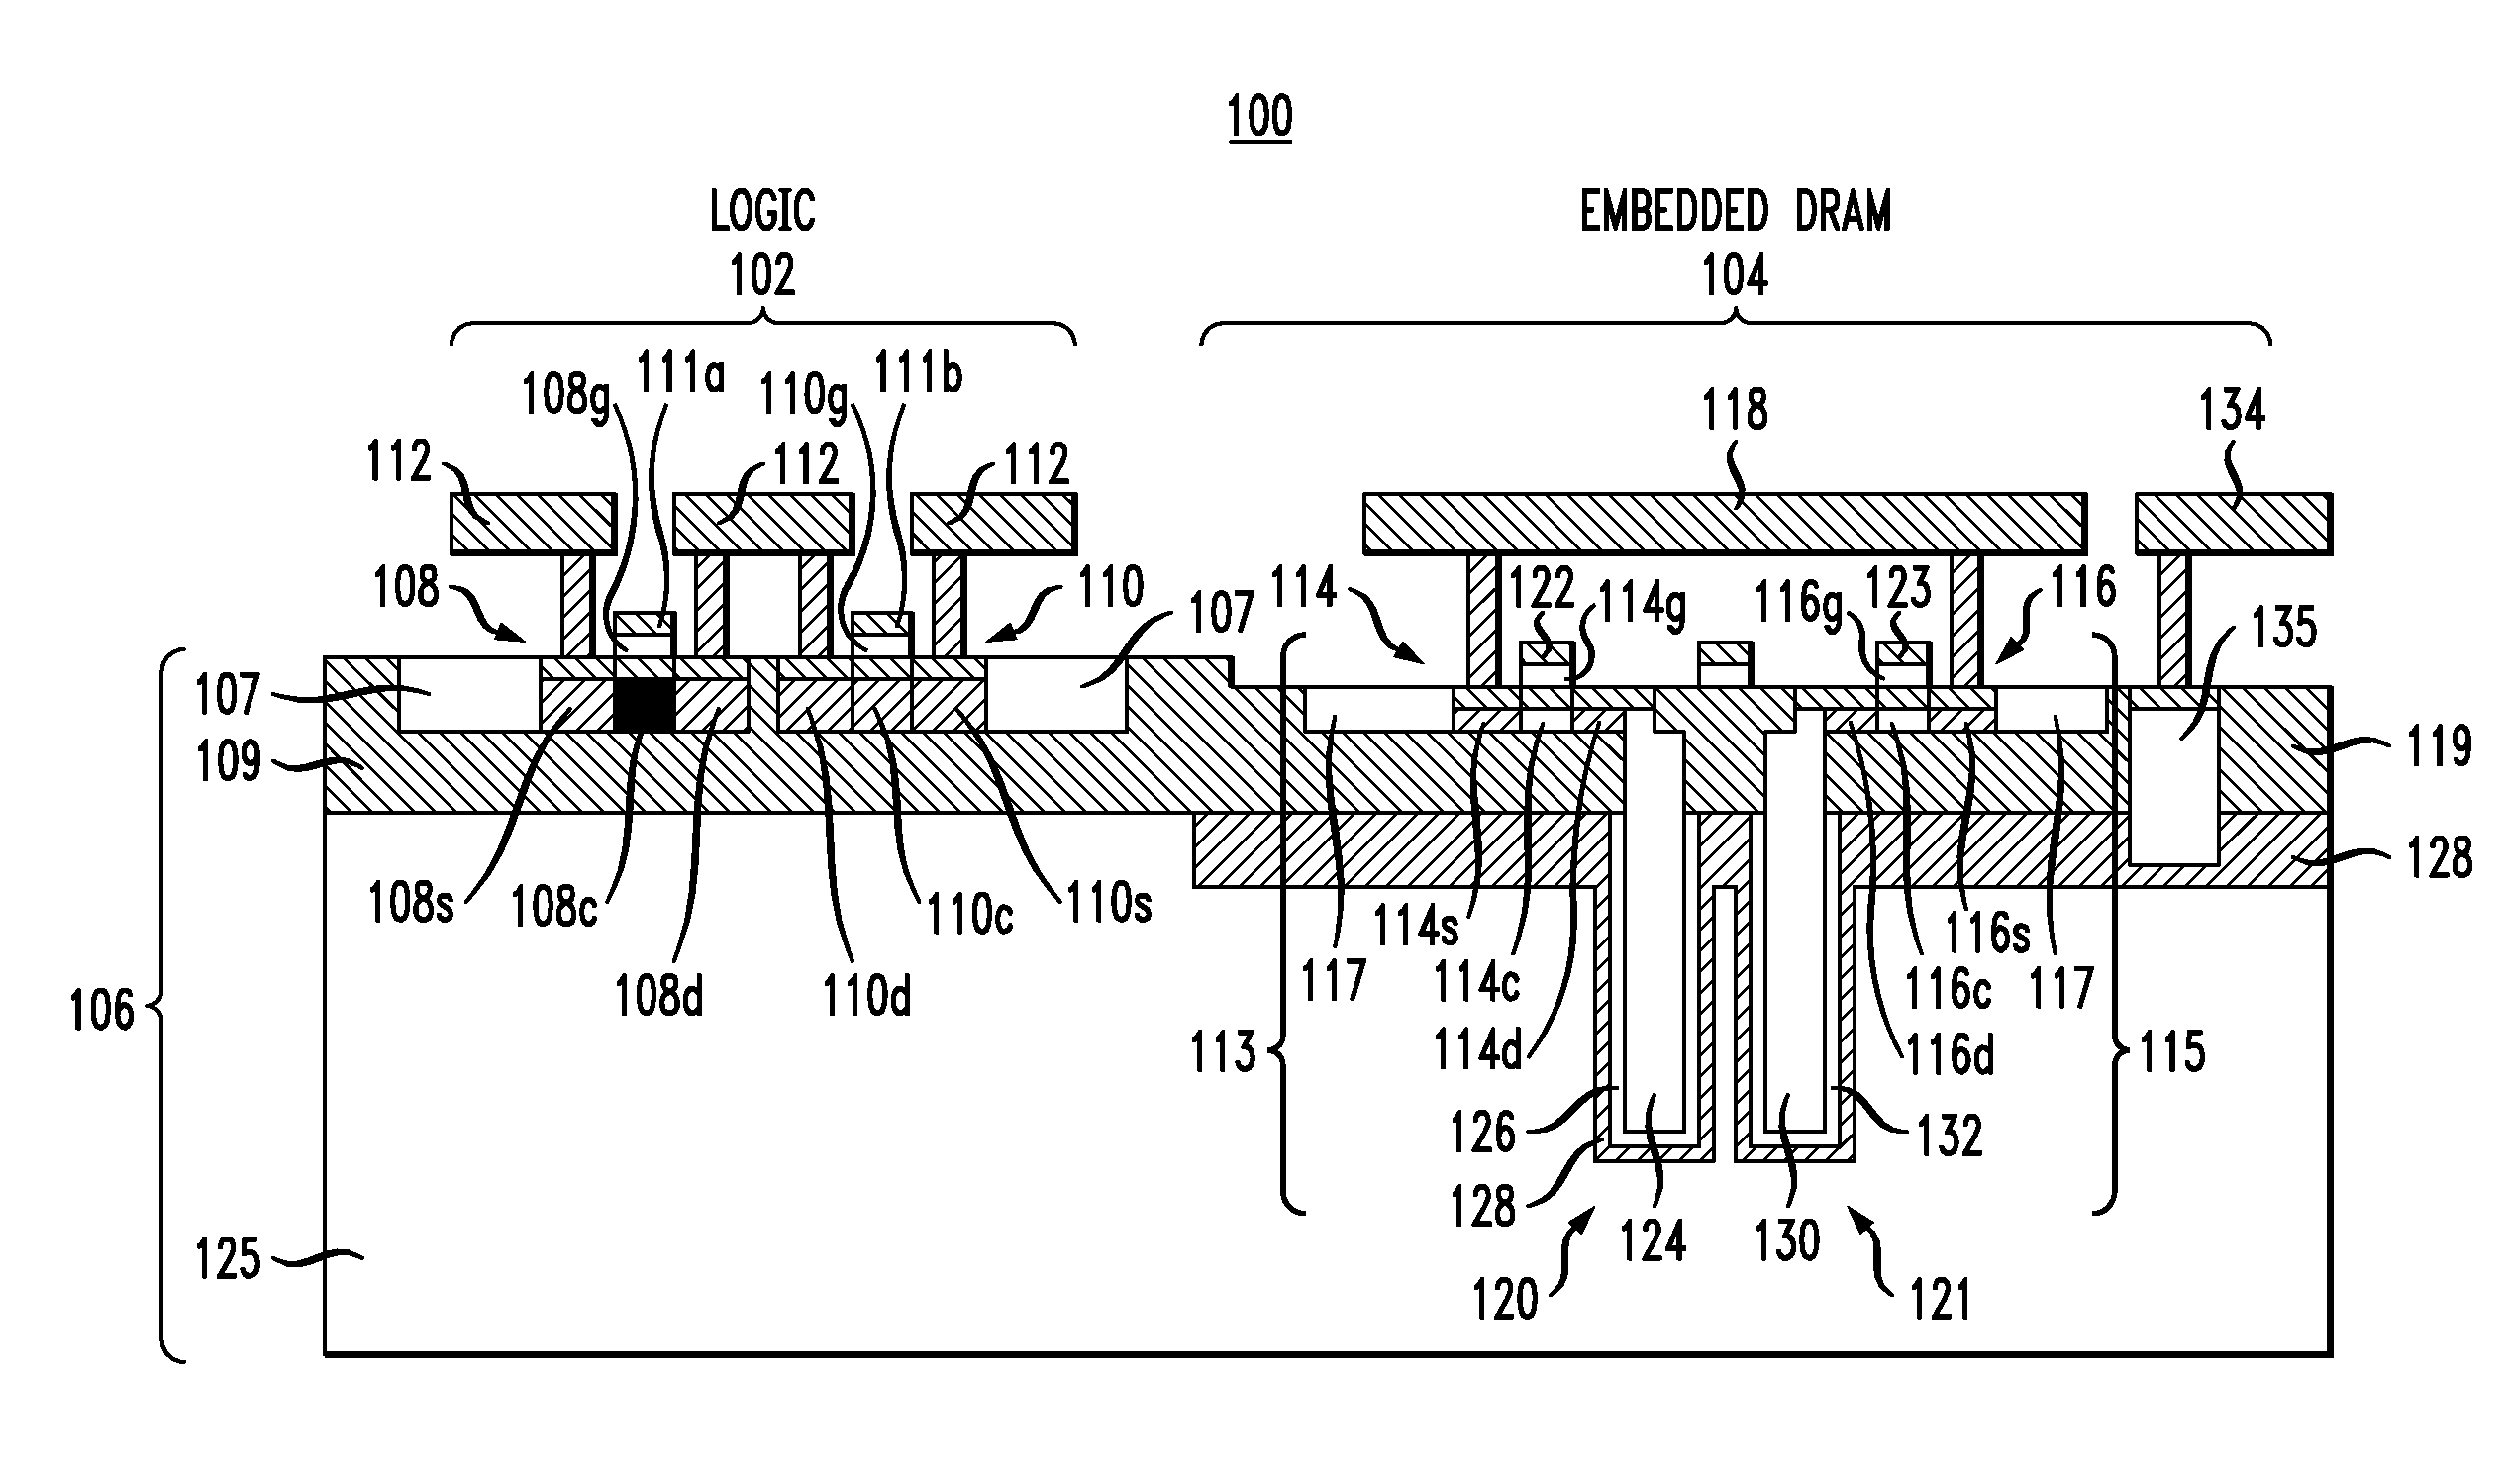 Embedded DRAM integrated circuits with extremely thin silicon-on-insulator pass transistors